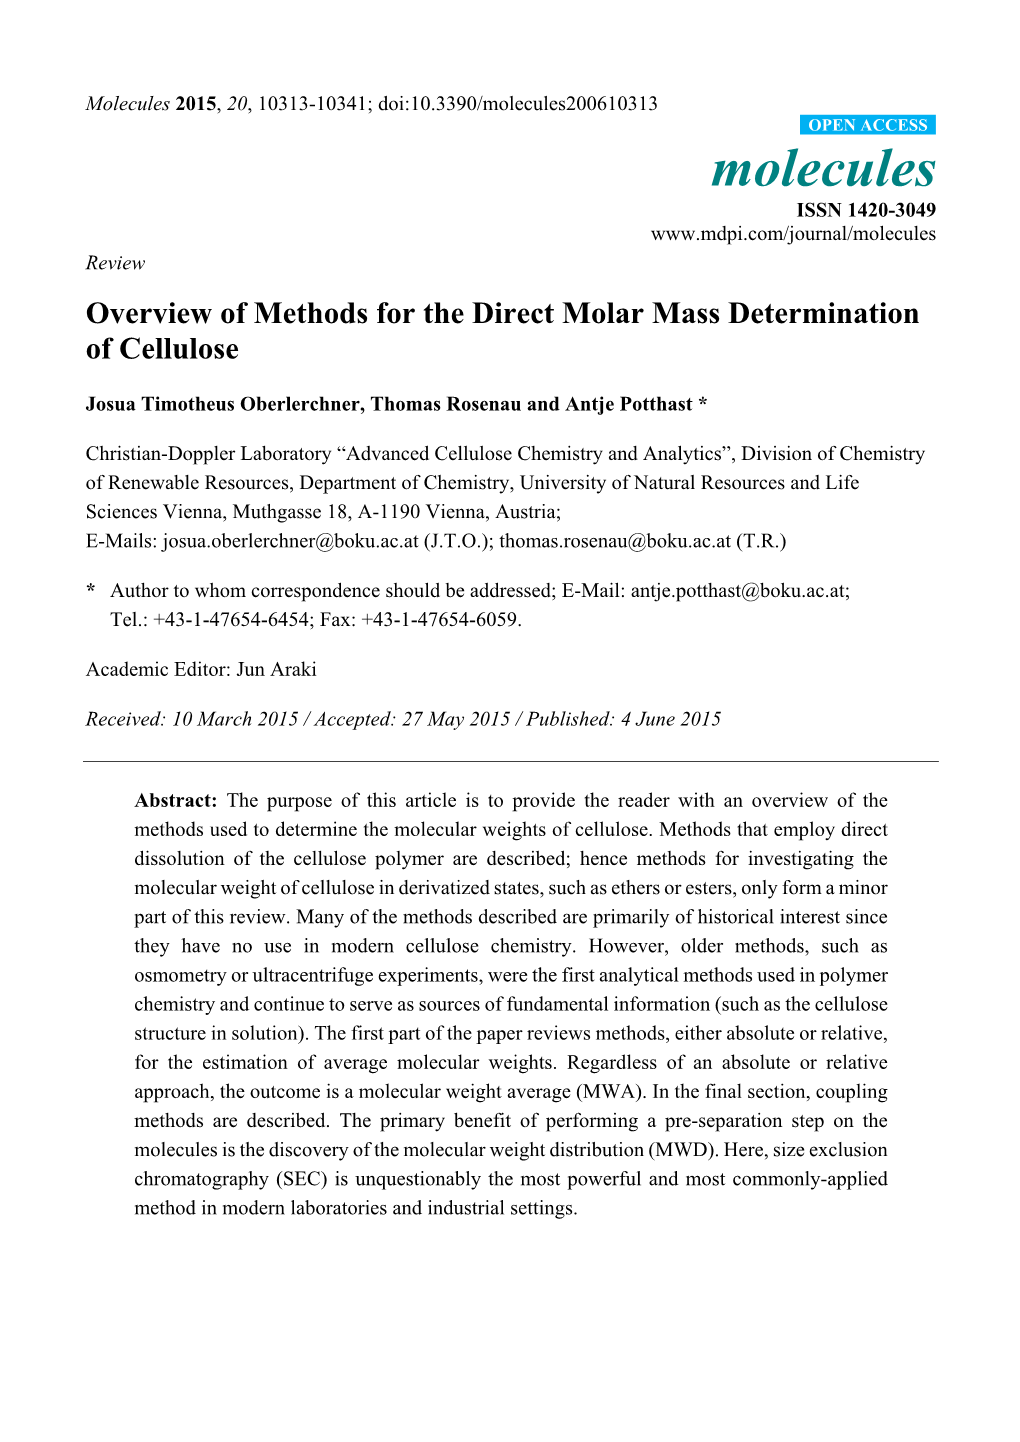 Overview of Methods for the Direct Molar Mass Determination of Cellulose